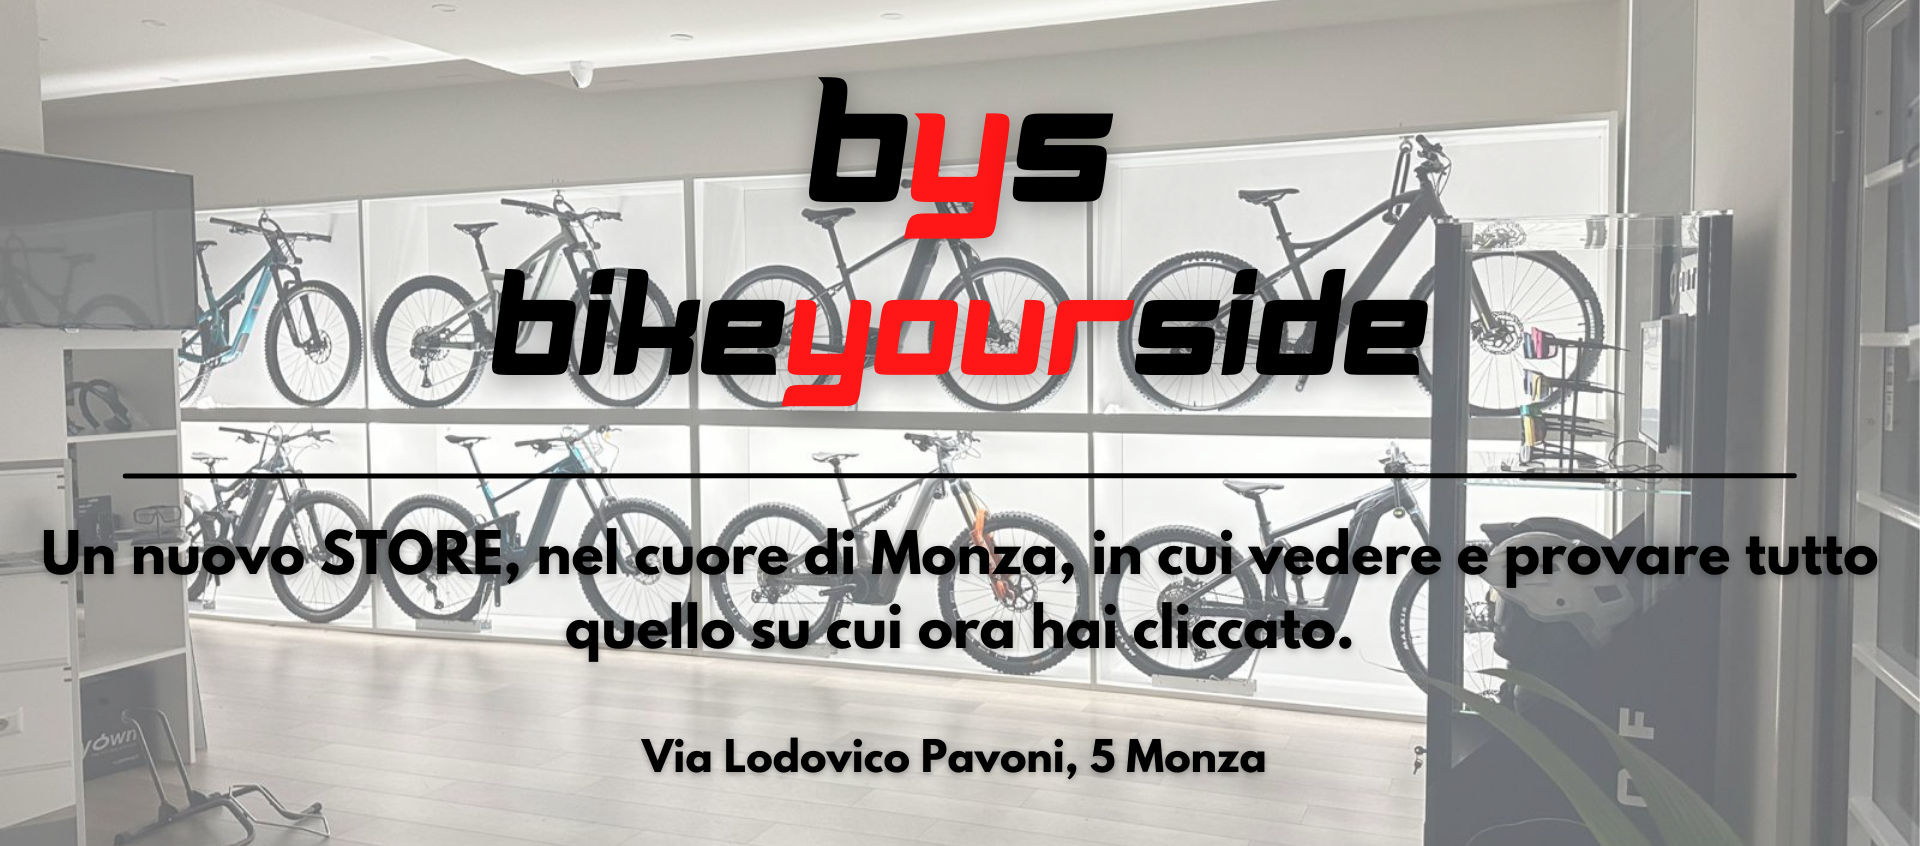 Bike Your Side - Nuovo Store